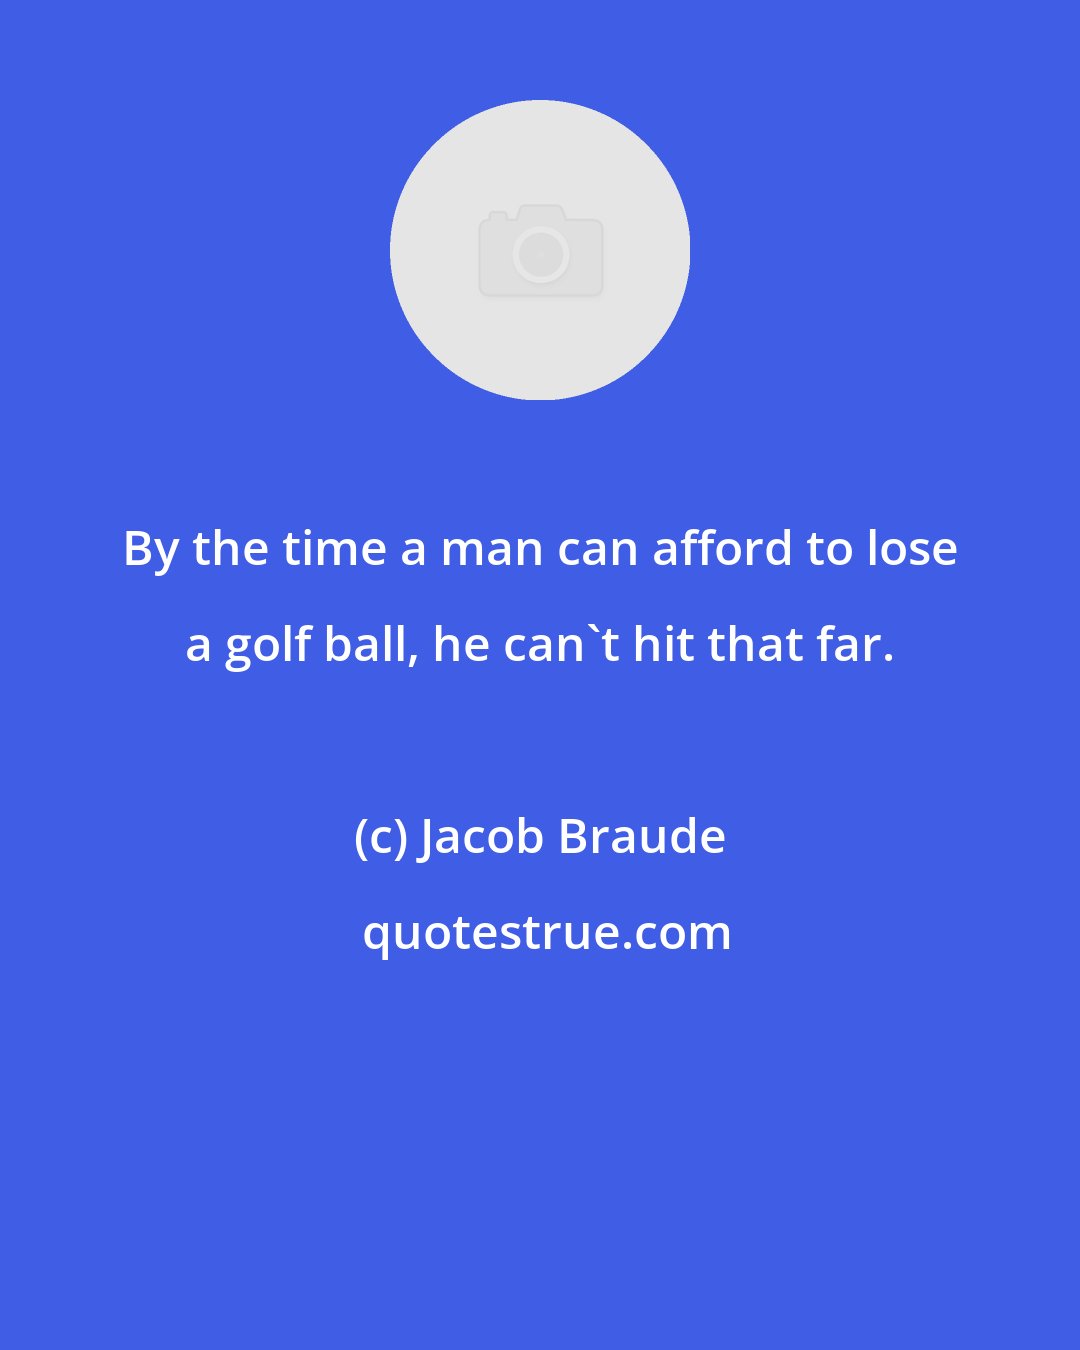 Jacob Braude: By the time a man can afford to lose a golf ball, he can't hit that far.